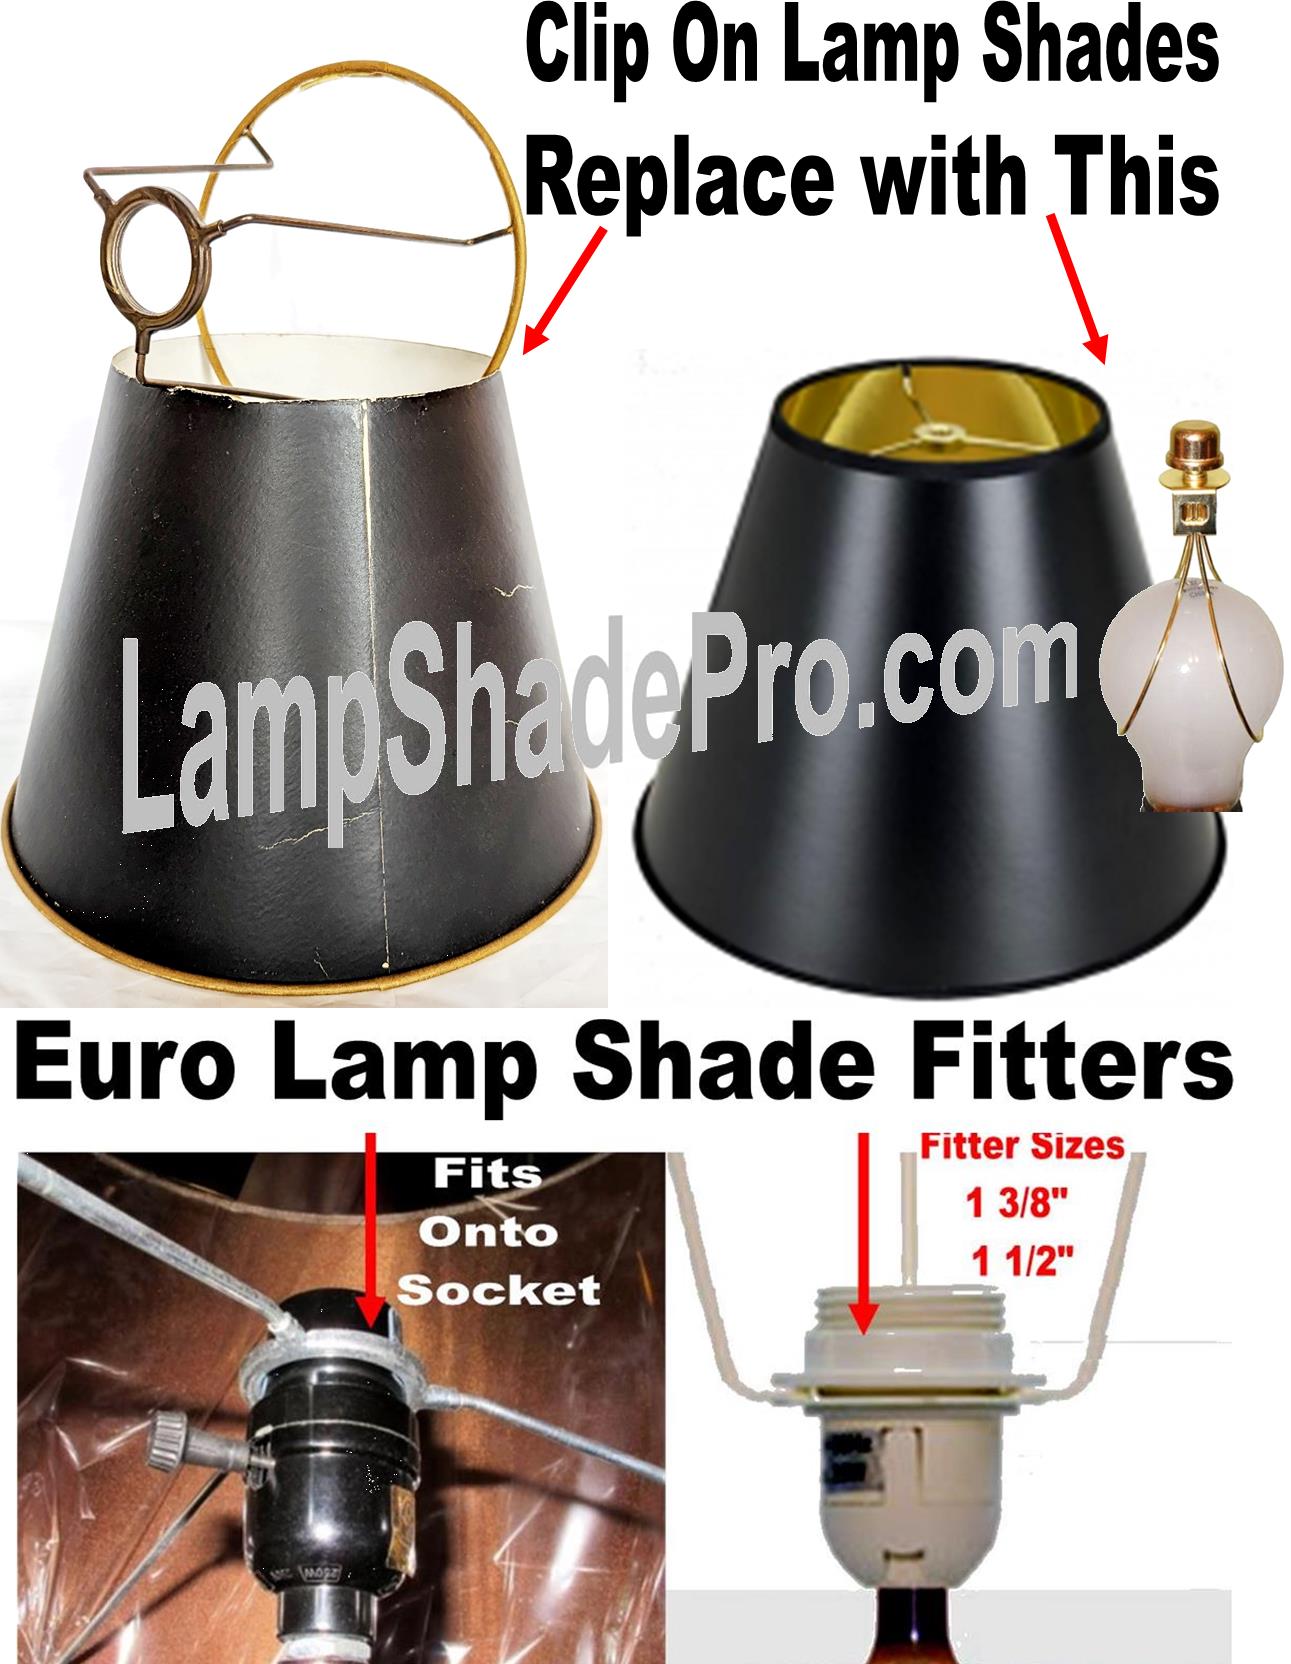 Replace Euro fitter lamp shade with clip on lamp shade